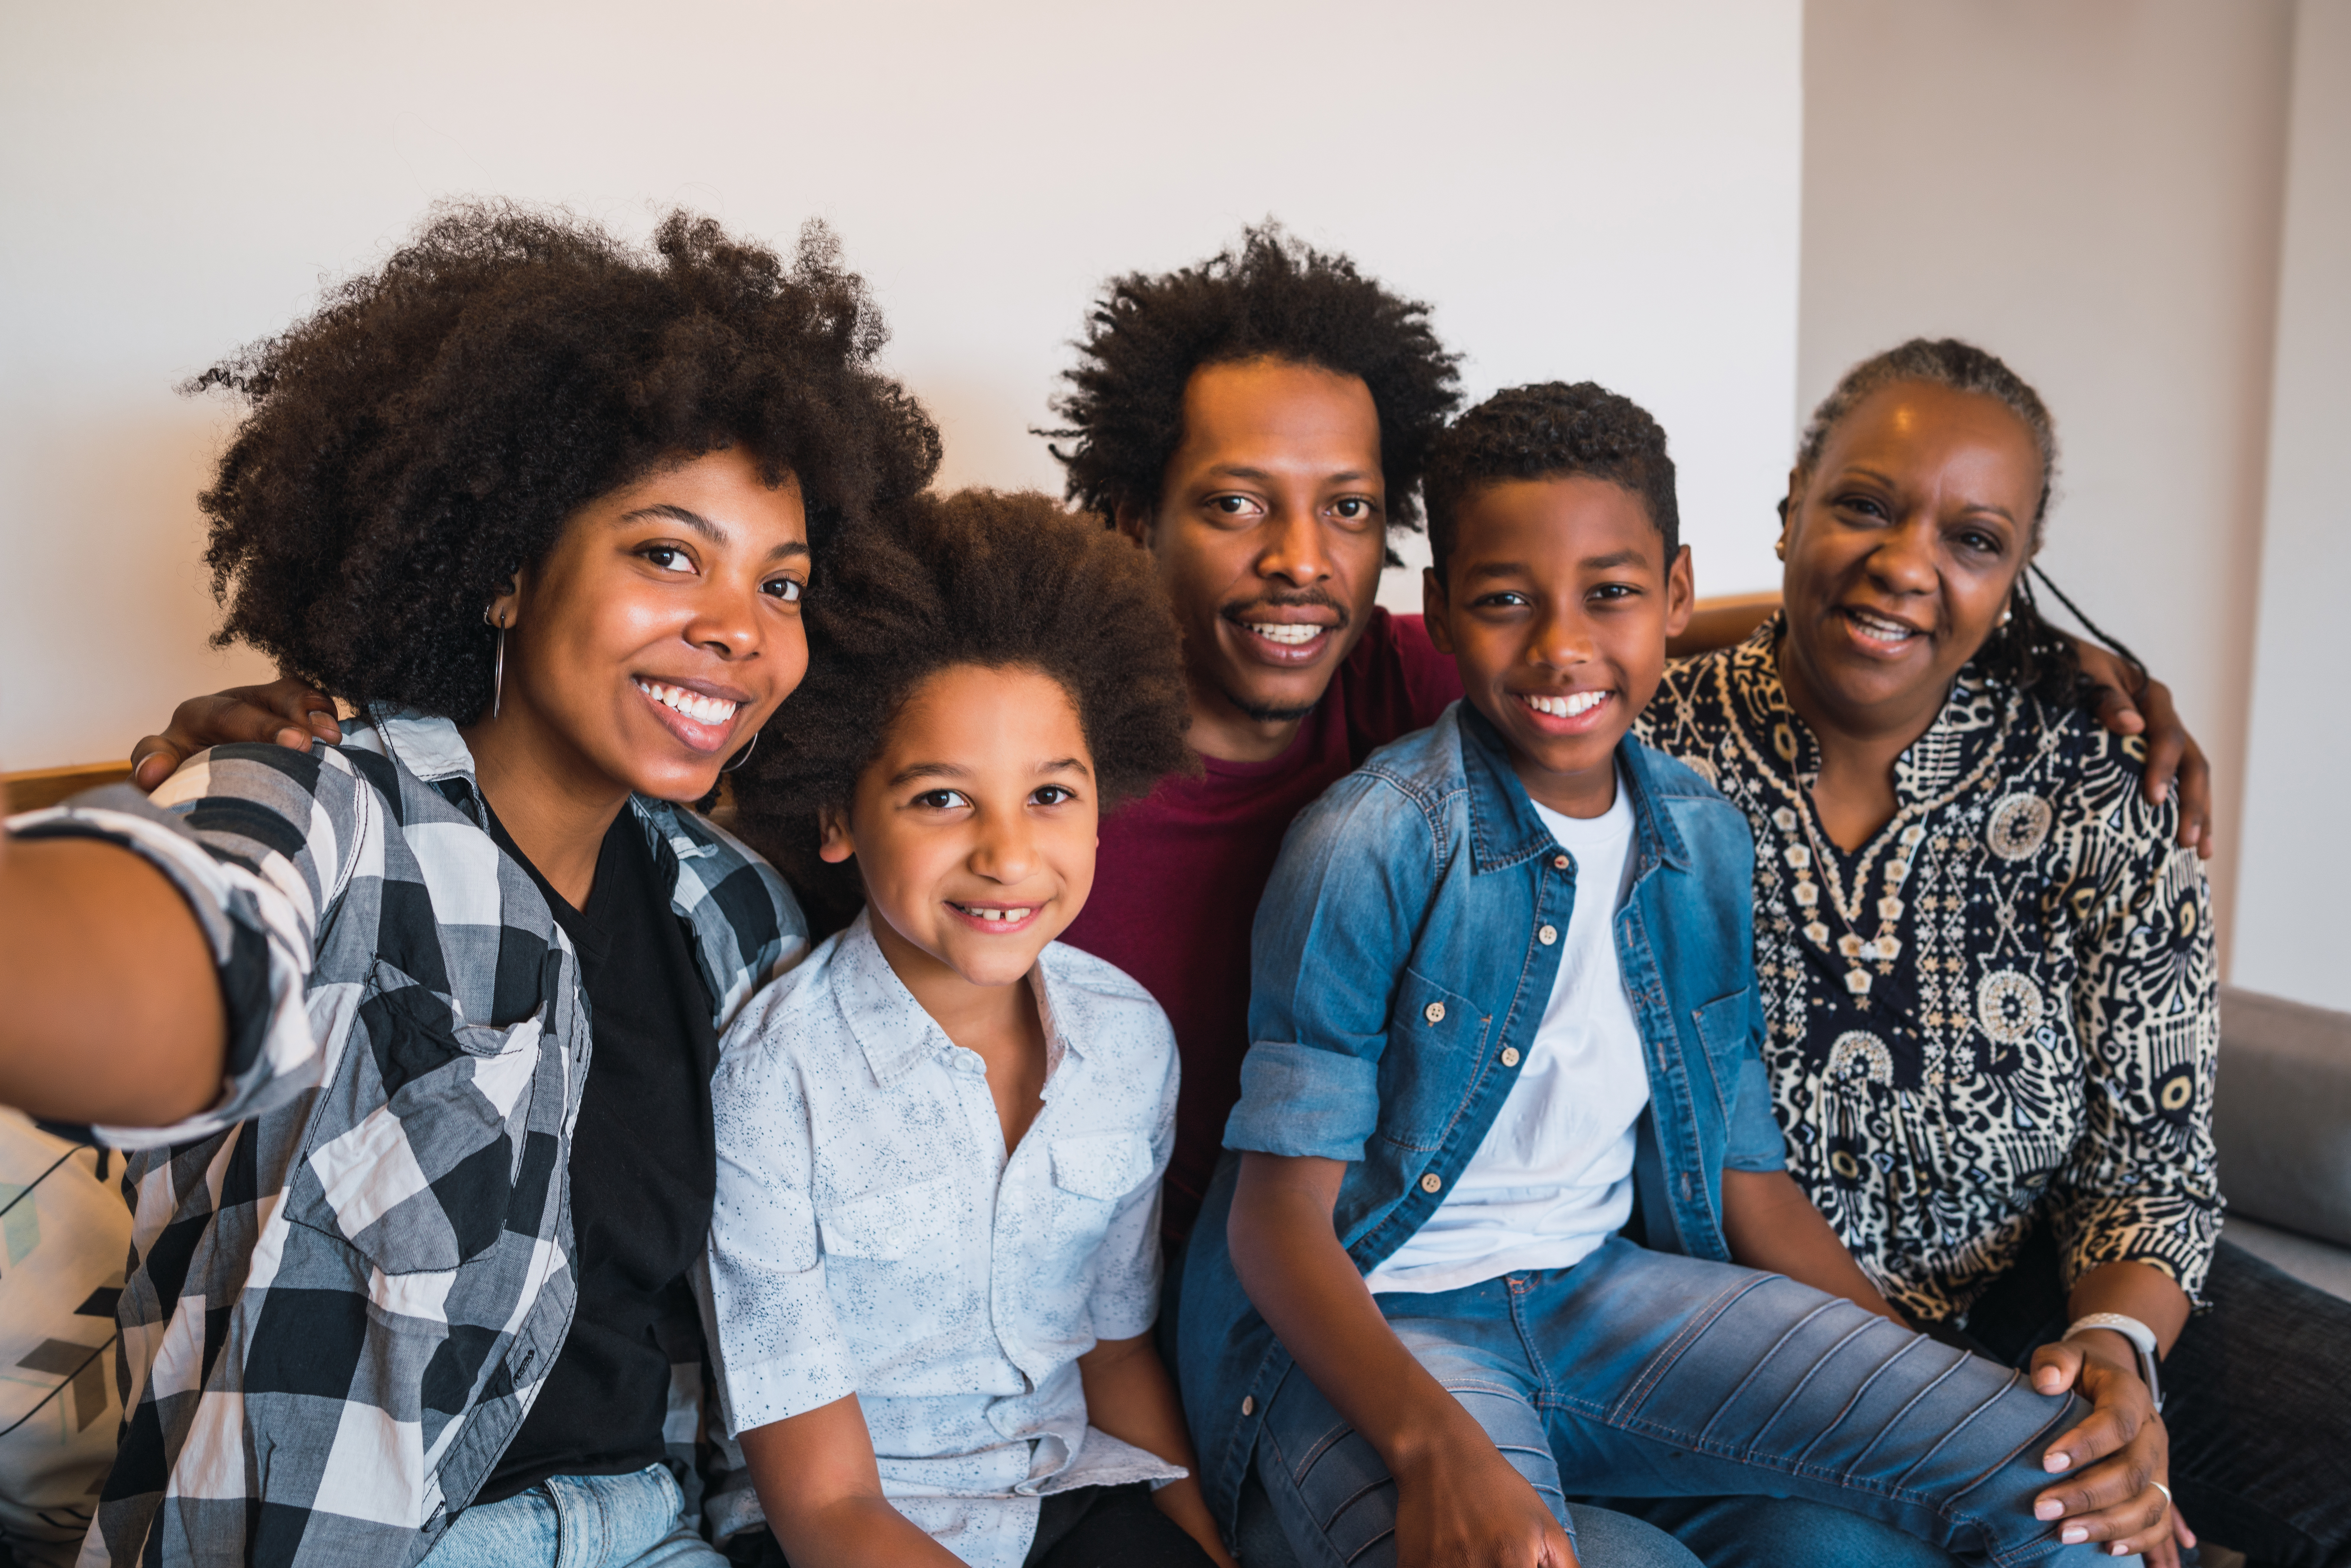 Portrait of african american multigenerational family taking a selfie together at home. Family and lifestyle concept.